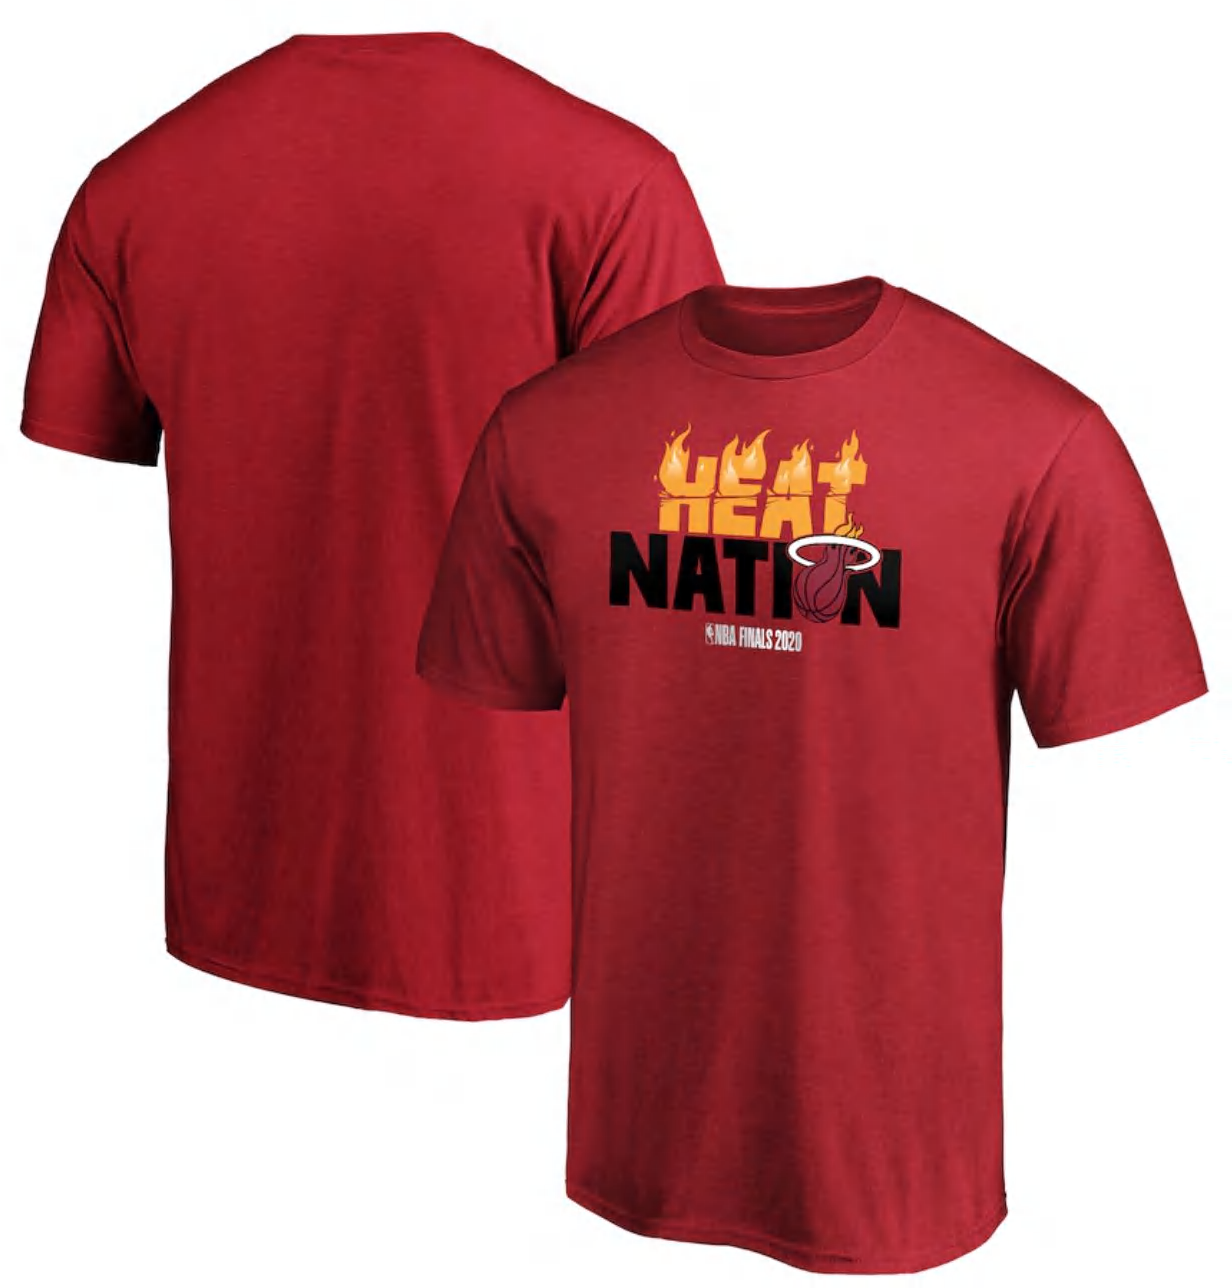 Official Miami NBA Miami Heat NBA Finals T-shirt - Ink In Action